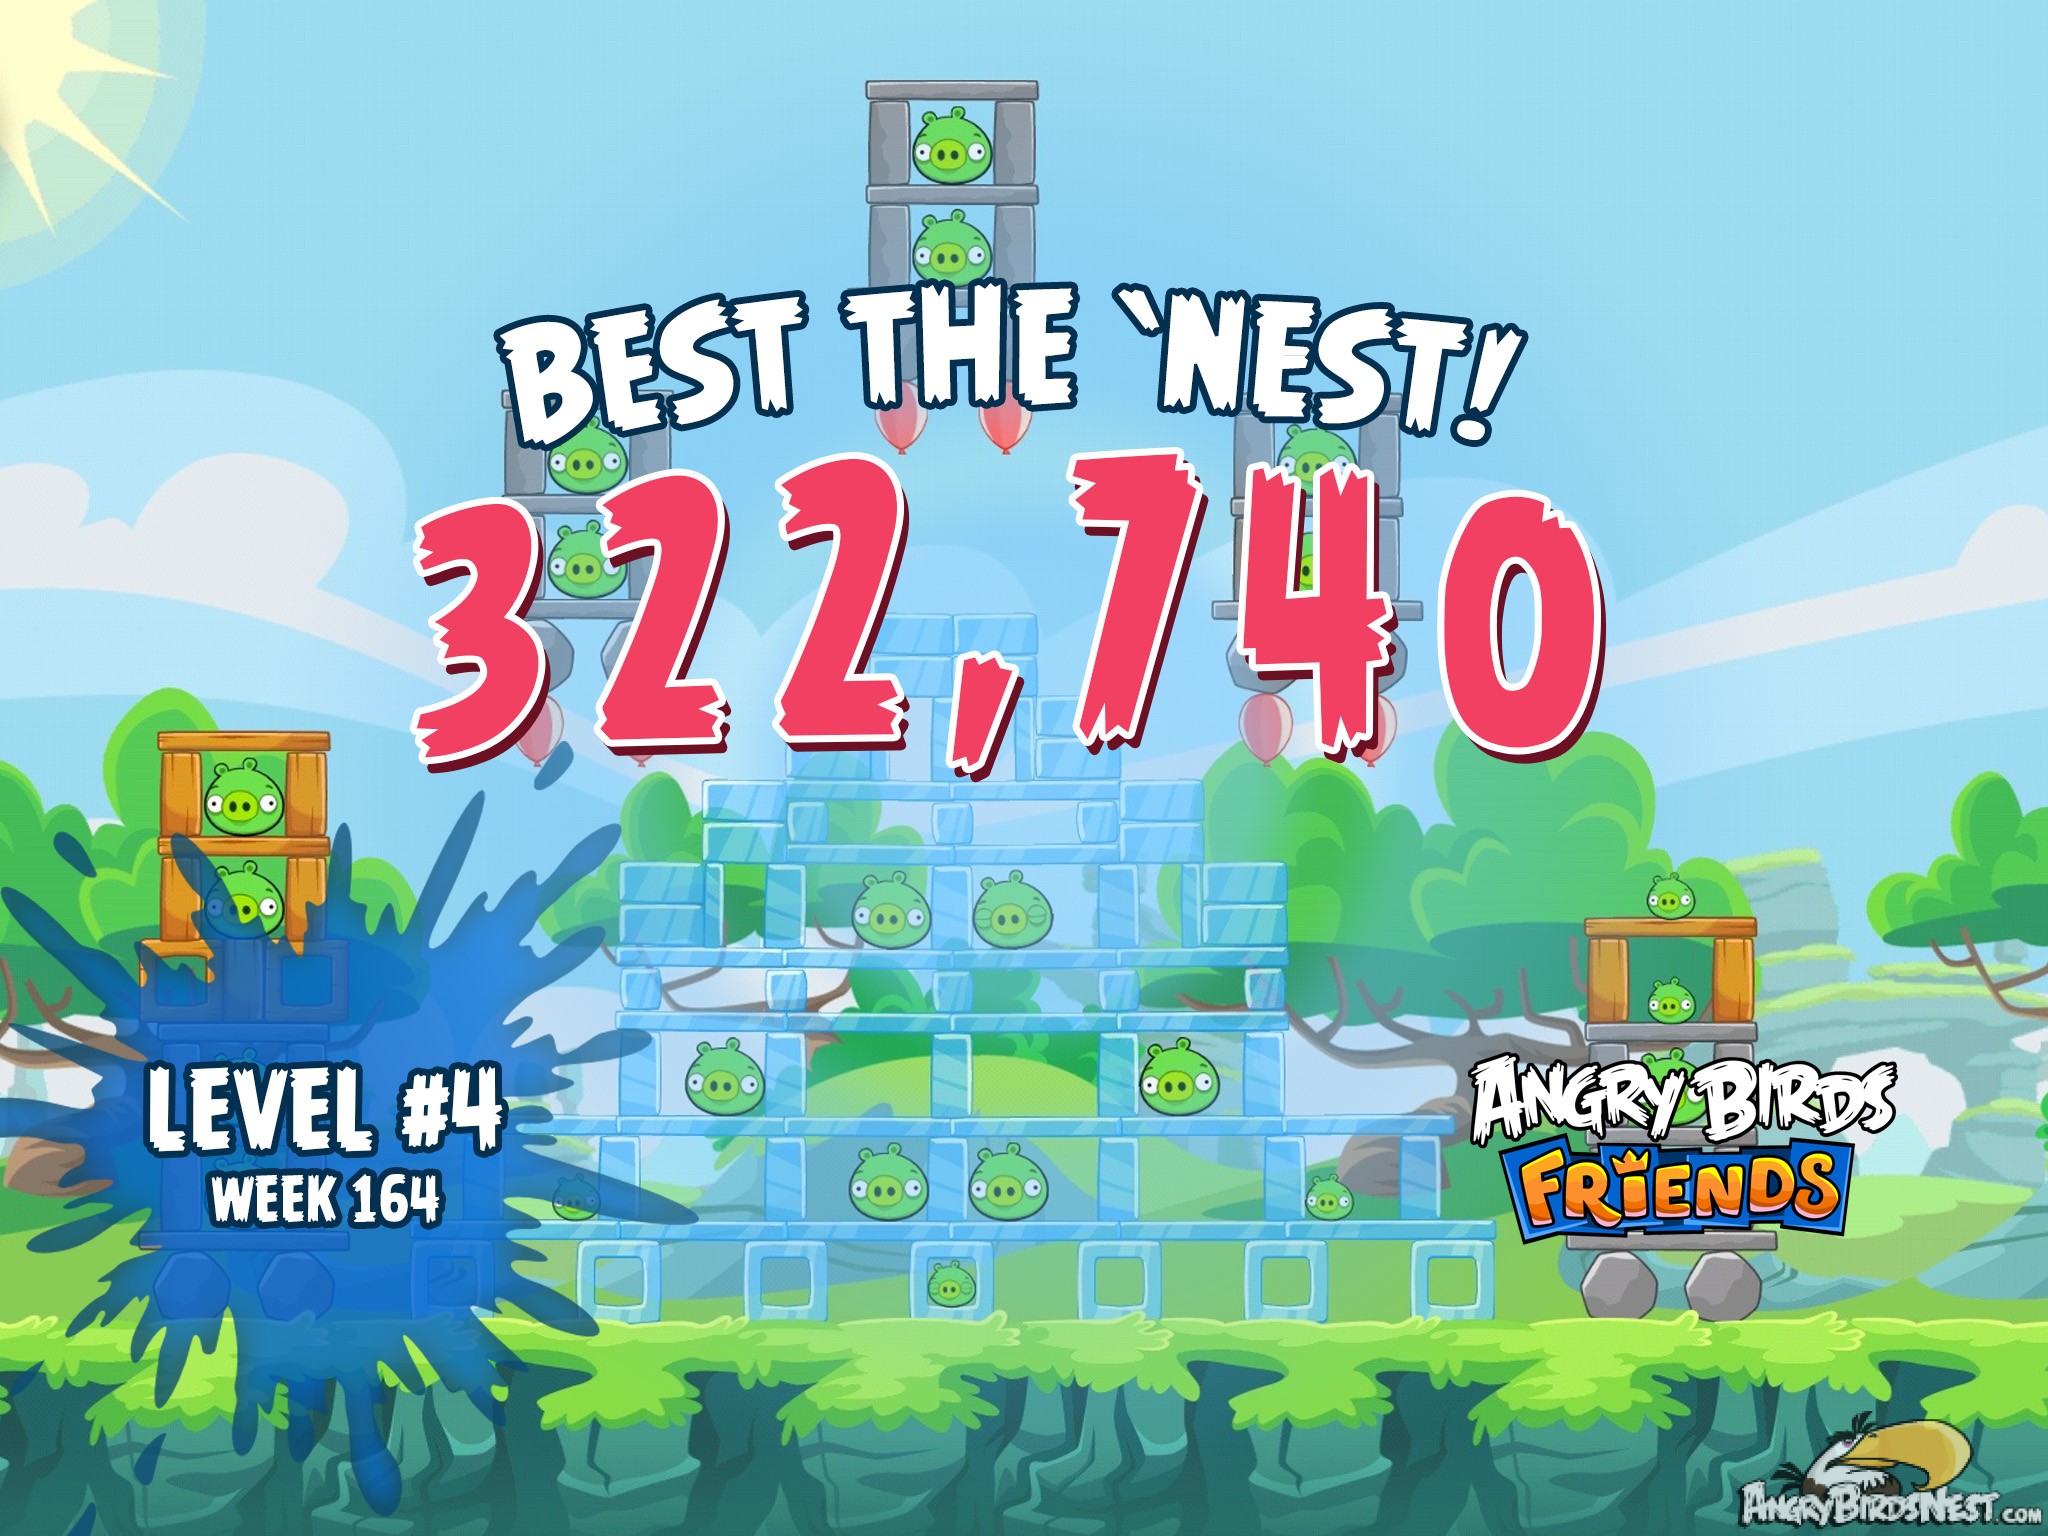 Angry Birds Friends Best the Nest Challenge Week 15